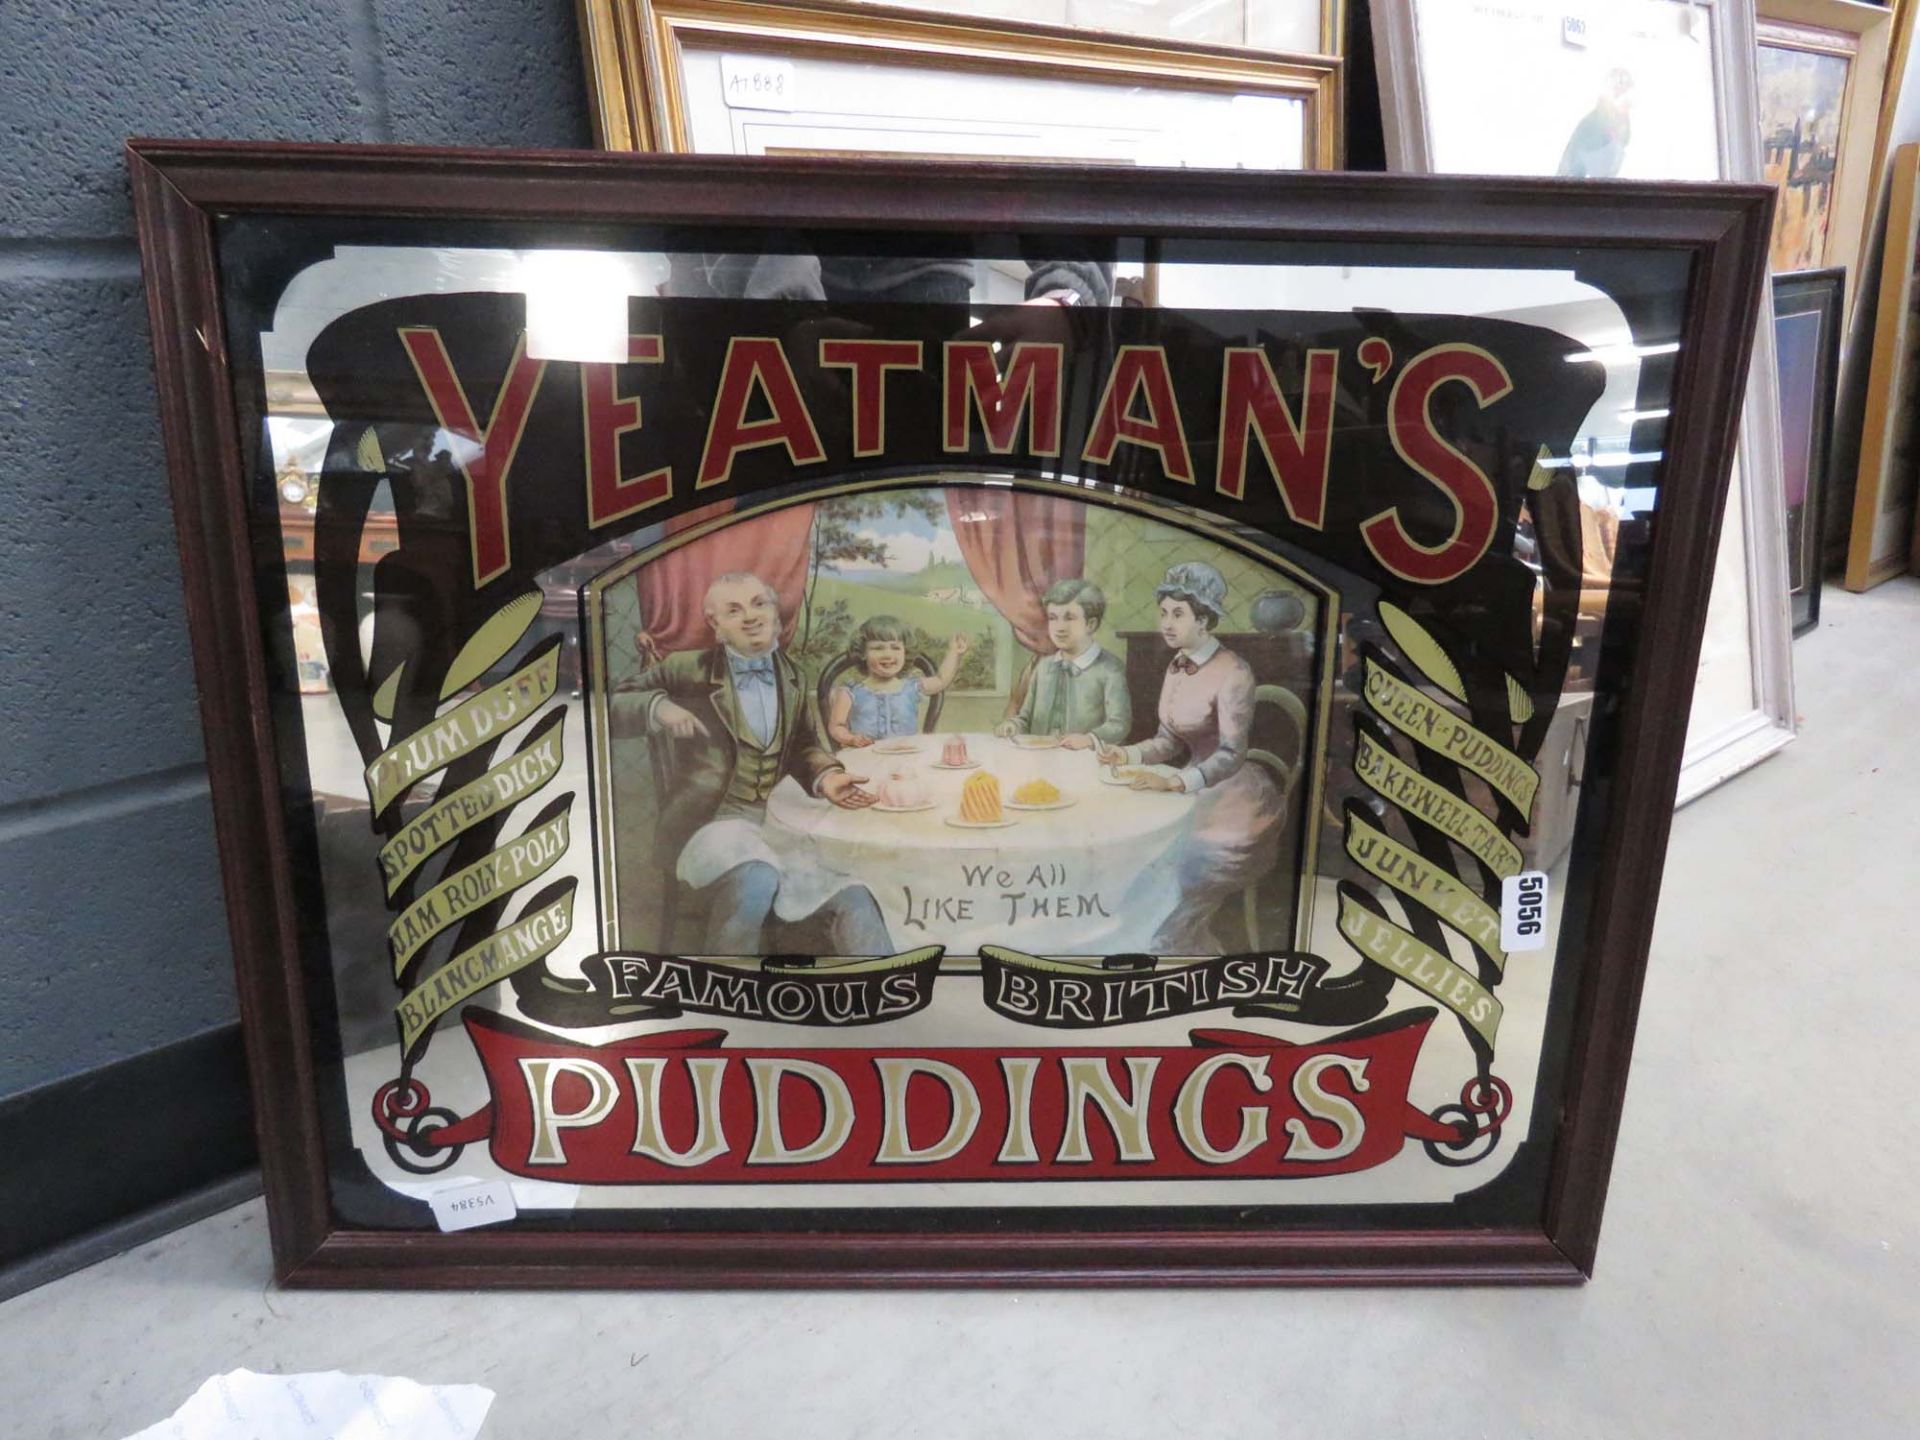 Reproduction Yeatman's Puddings advertising mirror